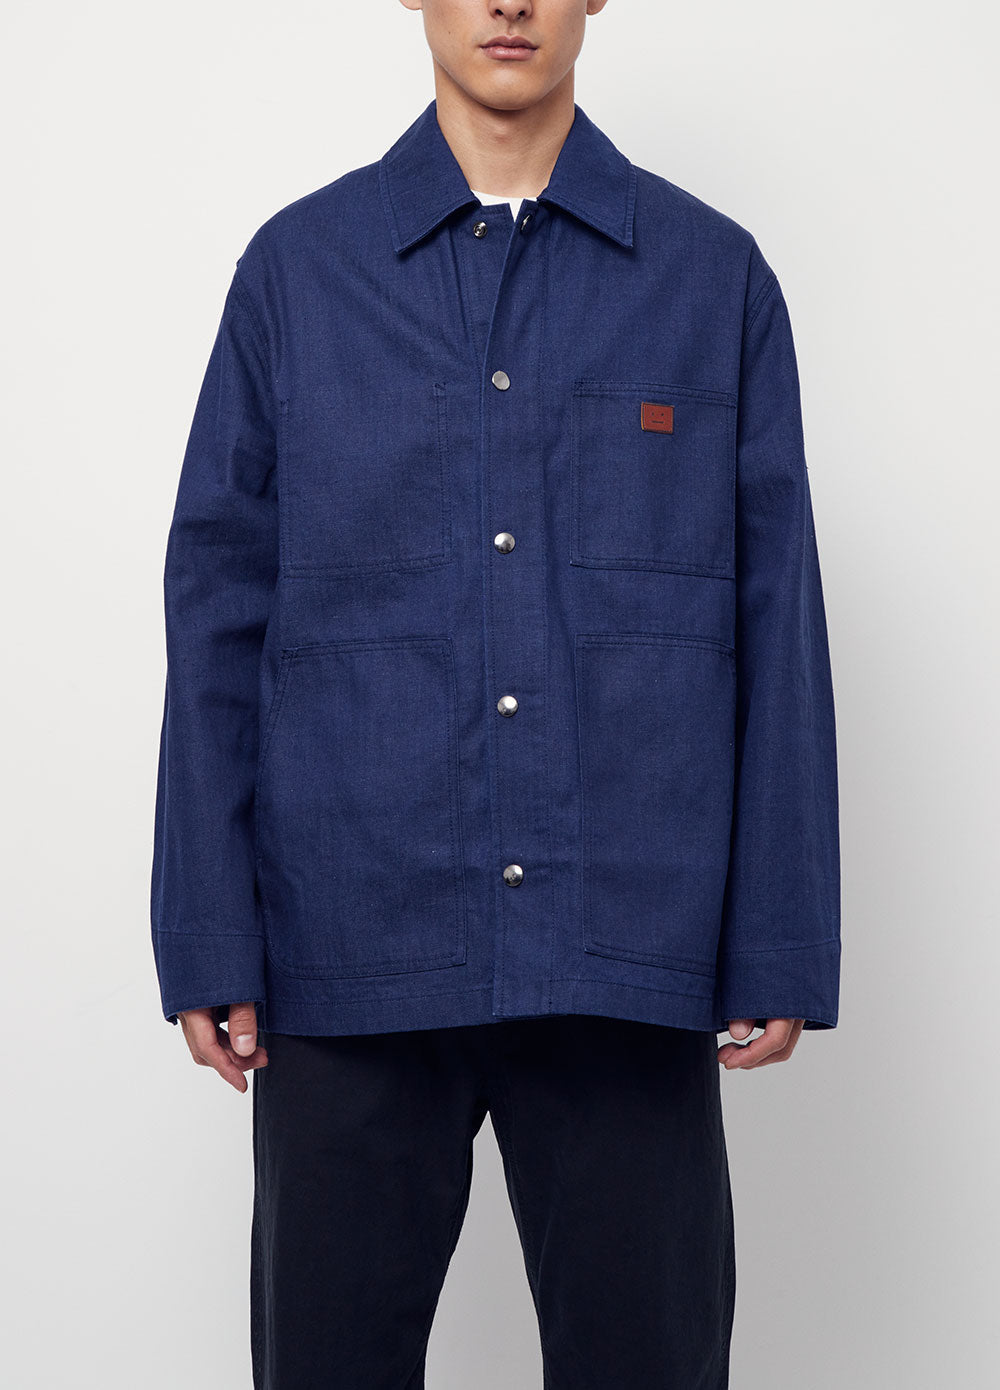 Face Workers Jacket